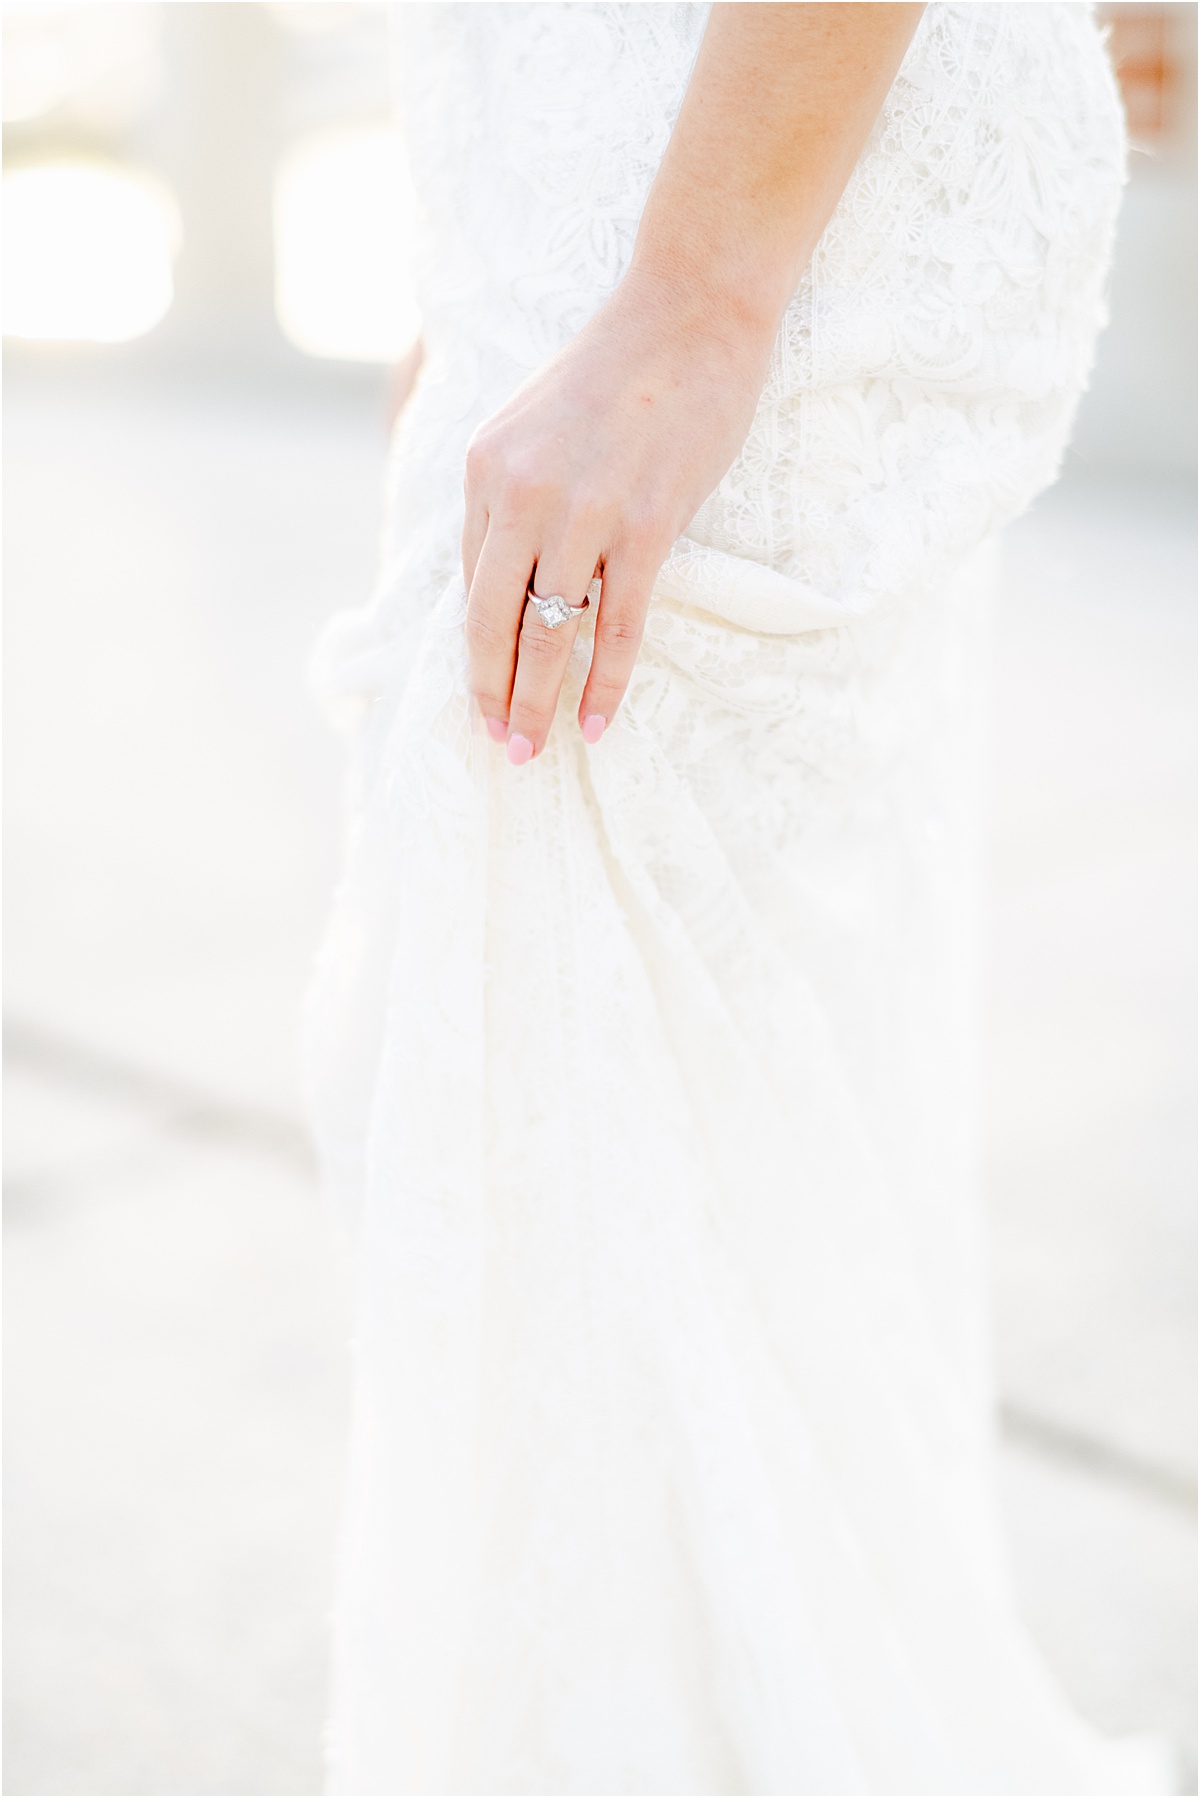 elegant detail of bride holding her dress with her ring showing